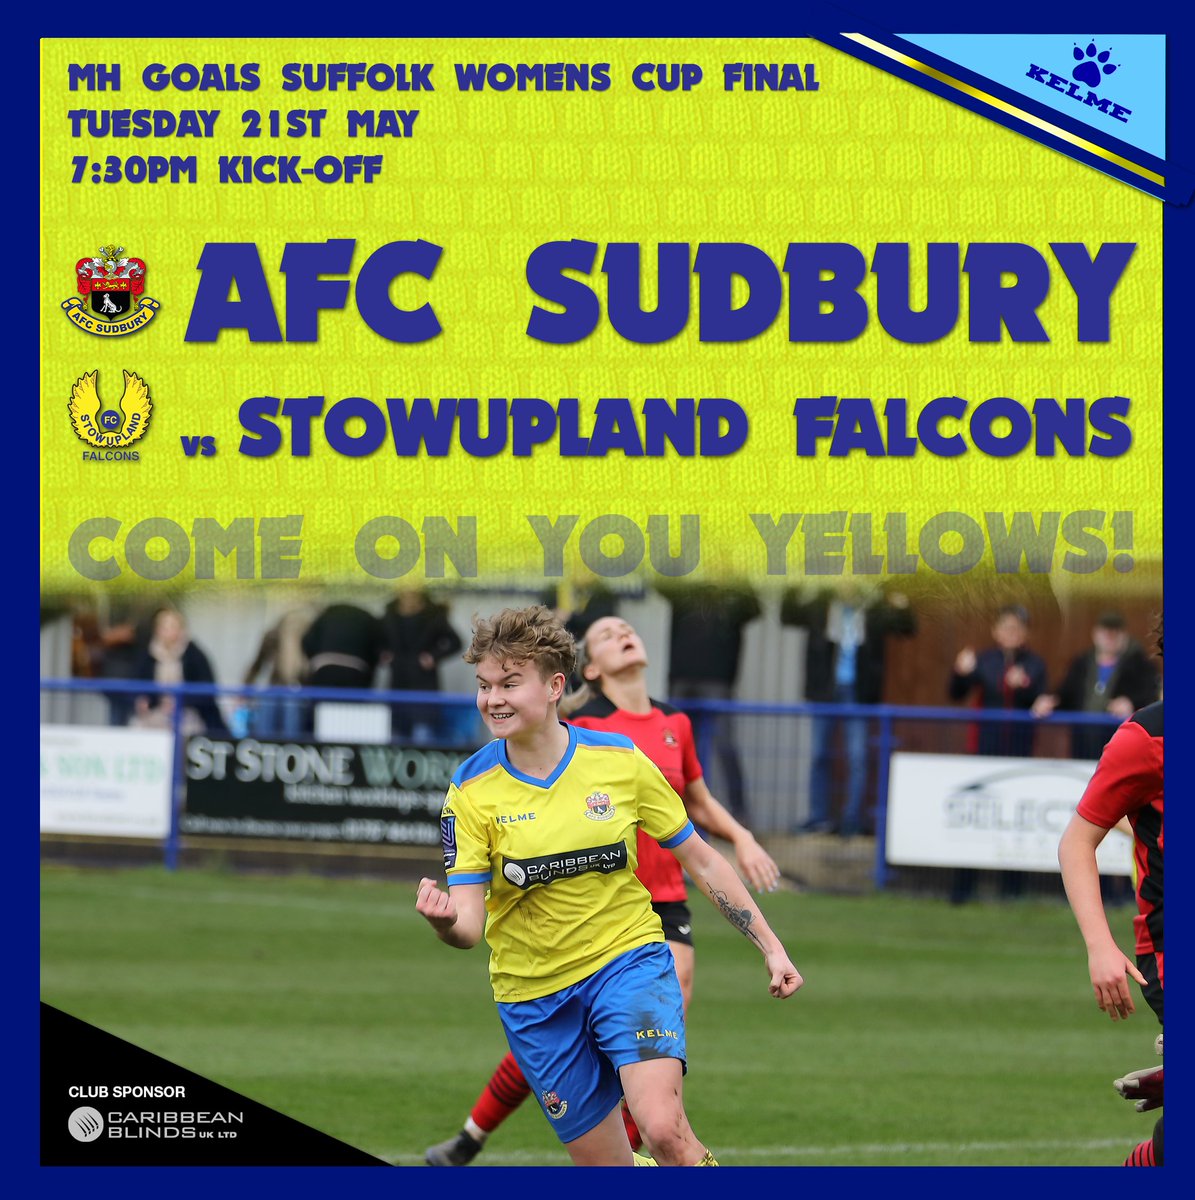 Under 4 weeks until our @SuffolkFA Cup Final clash with @StowFalcons 
Full details of ticketing and travel details to come next week.
Come on you Yellows